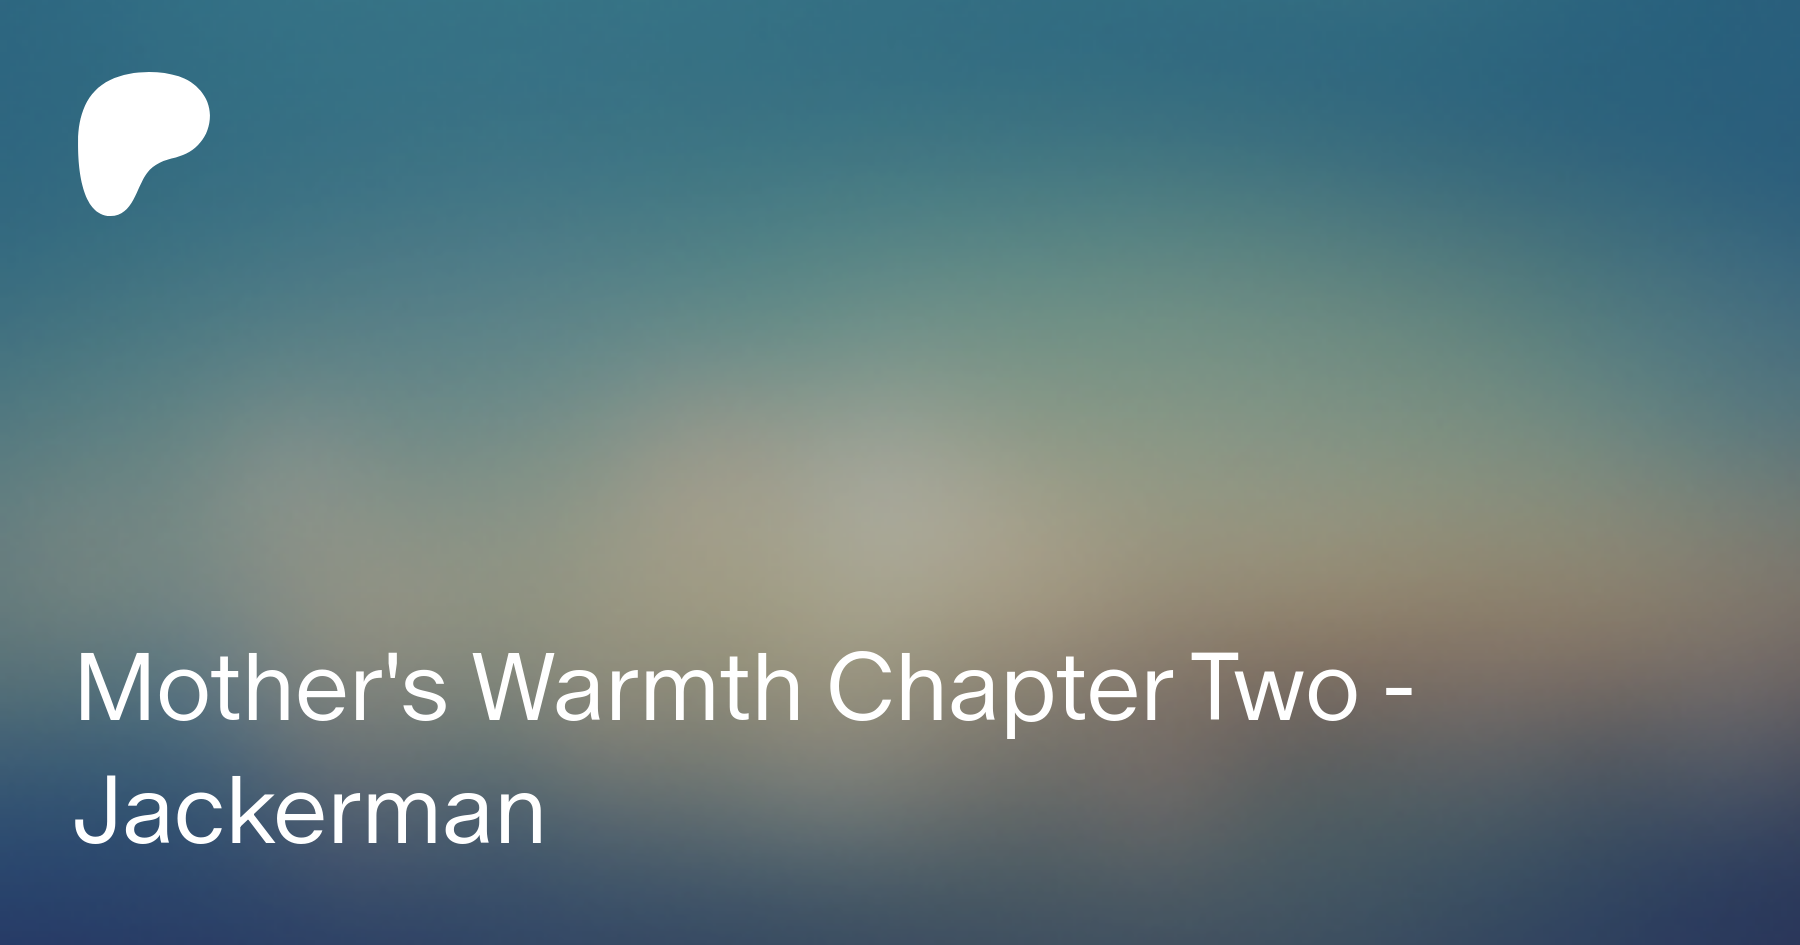 Mothers warmth chapter two - jackerman